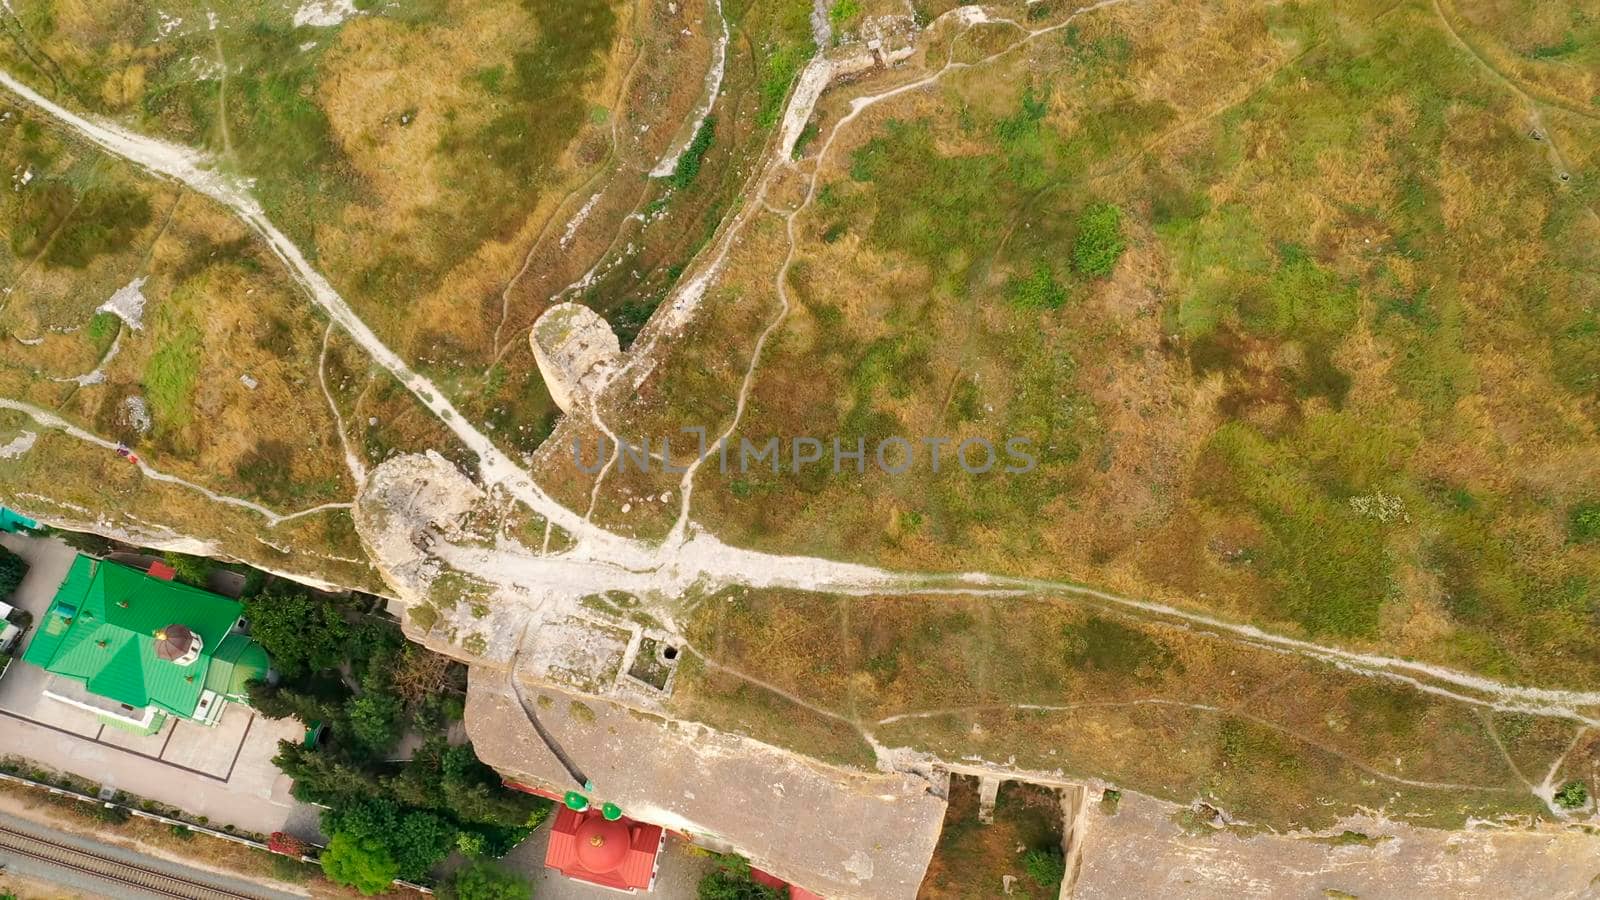 Aerial survey of the relief of the territory of Inkerman, Crimea by Vvicca